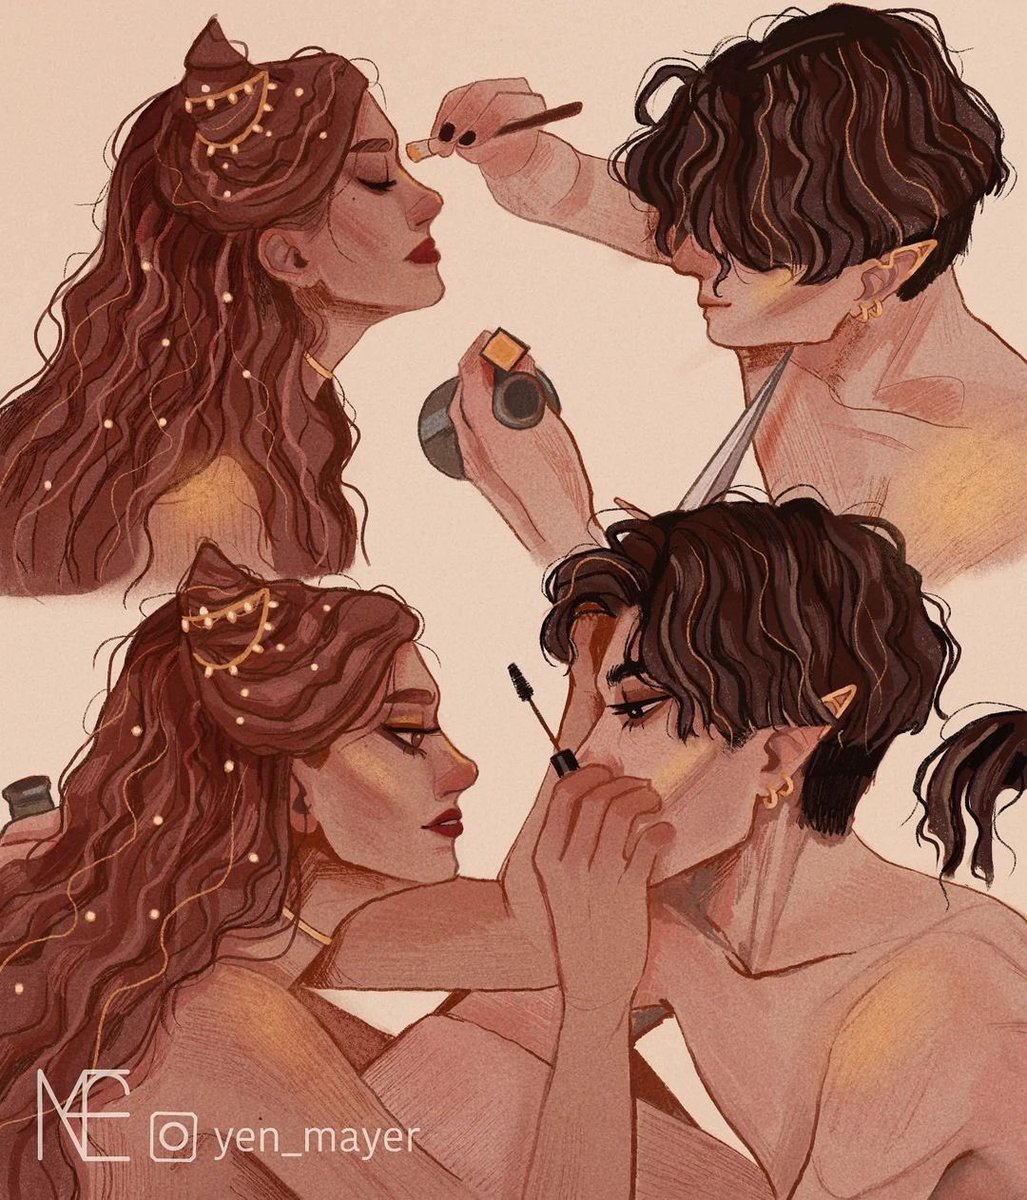 my fav genre of judecardan art is them doing each other’s makeup